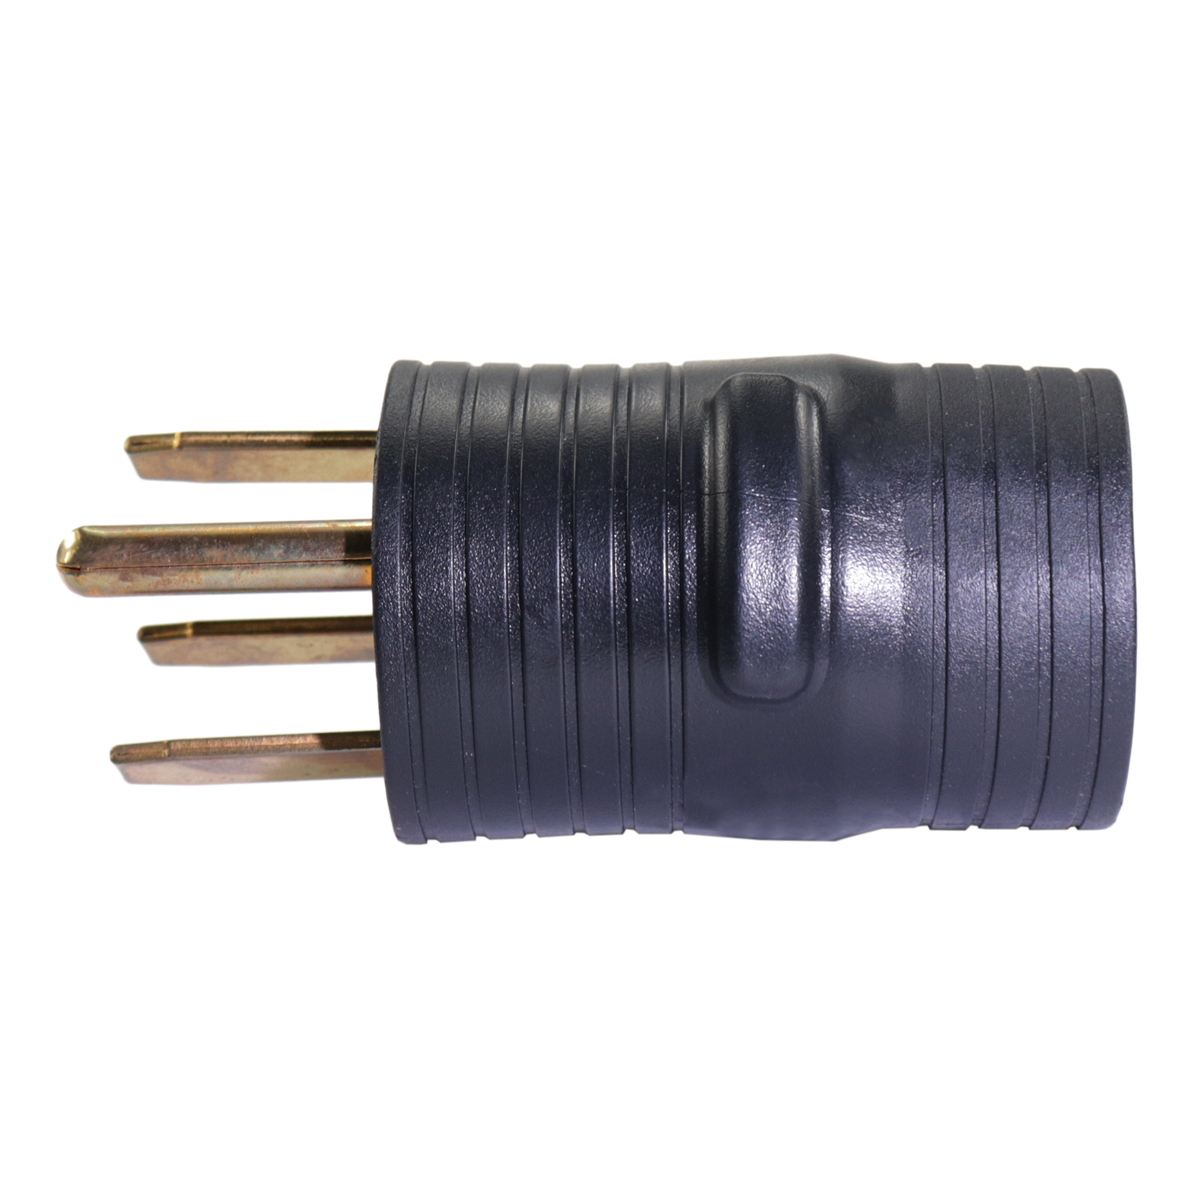 RV-Electrical-Locking-Adapter-50A-Male-to-30A-Female-Locking-Plug-Connector-1403285-8